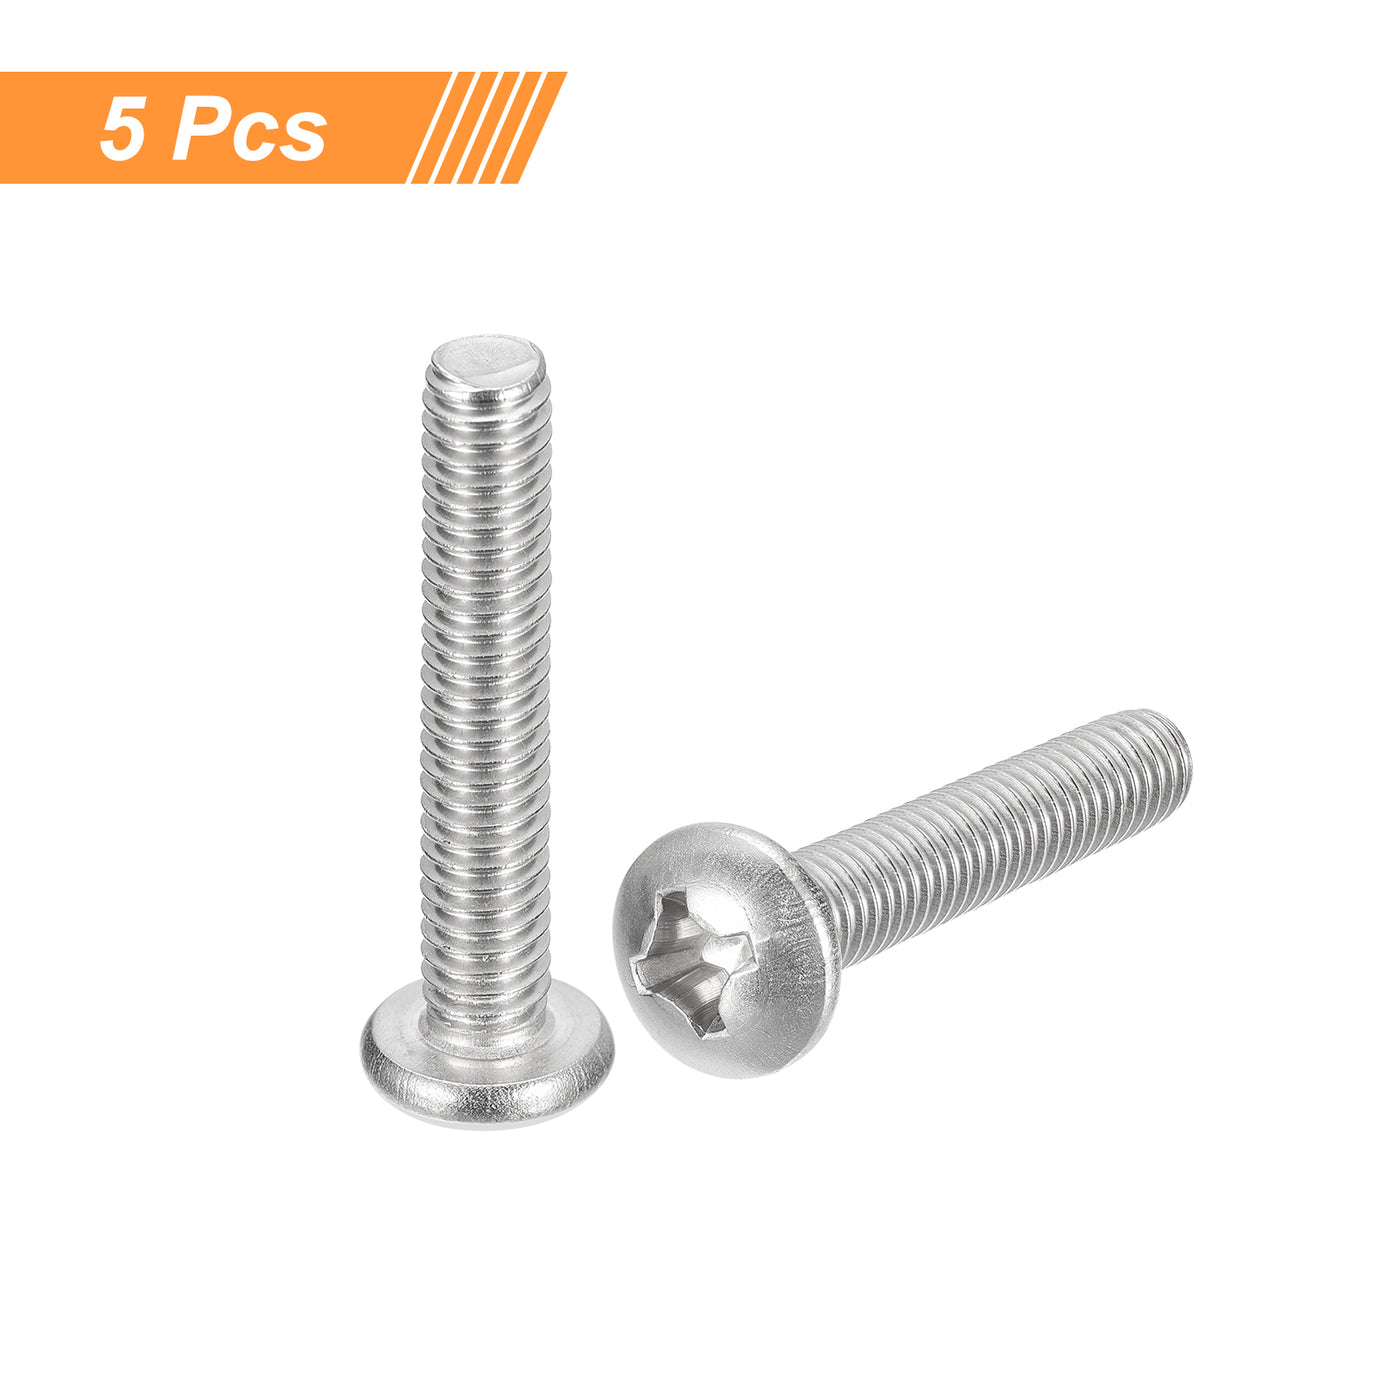 uxcell Uxcell 5/16-18x2" Pan Head Machine Screws, Stainless Steel 18-8 Screw, Pack of 5